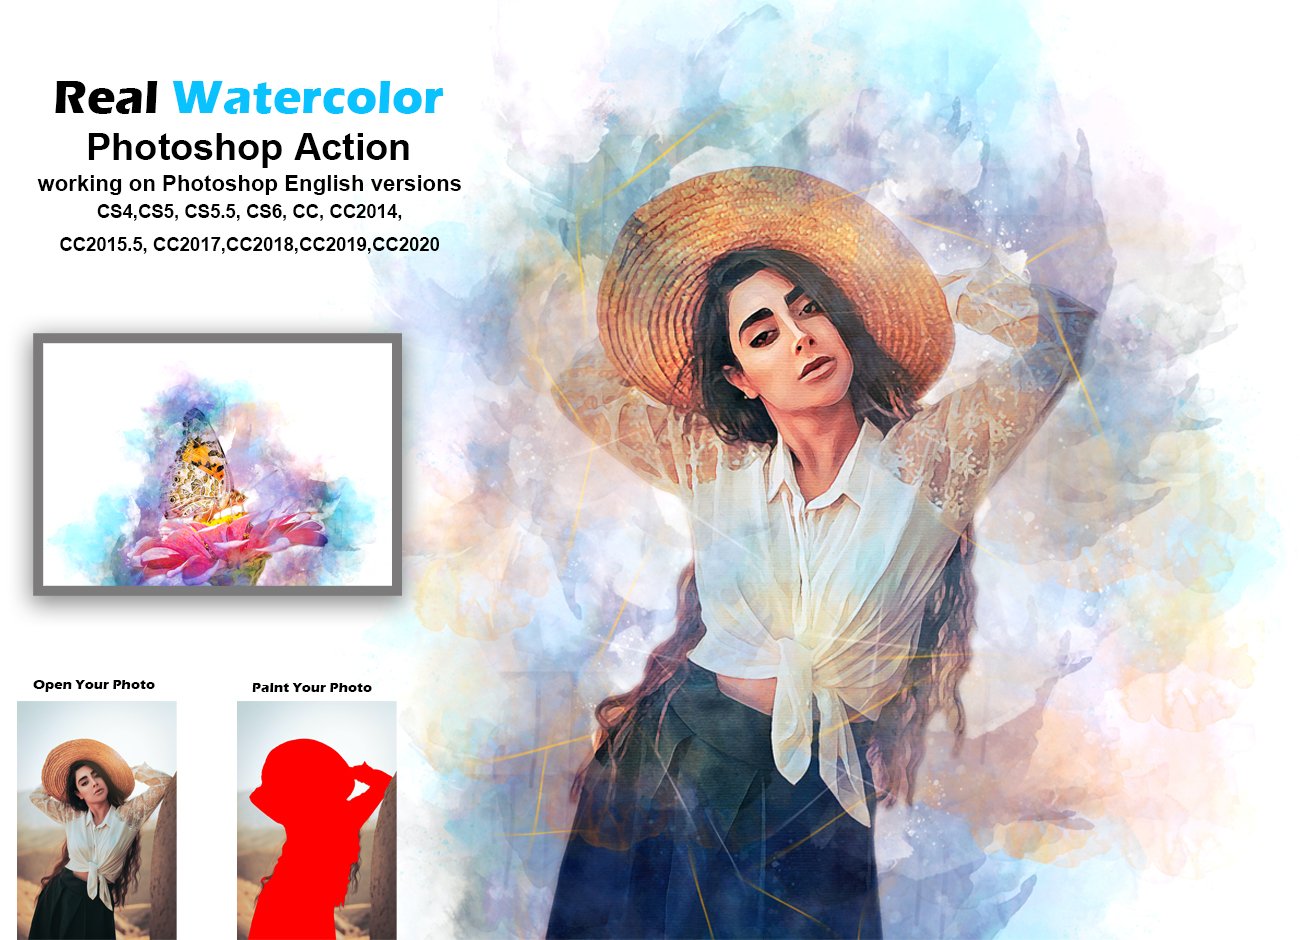 Real Watercolor Photoshop Actioncover image.